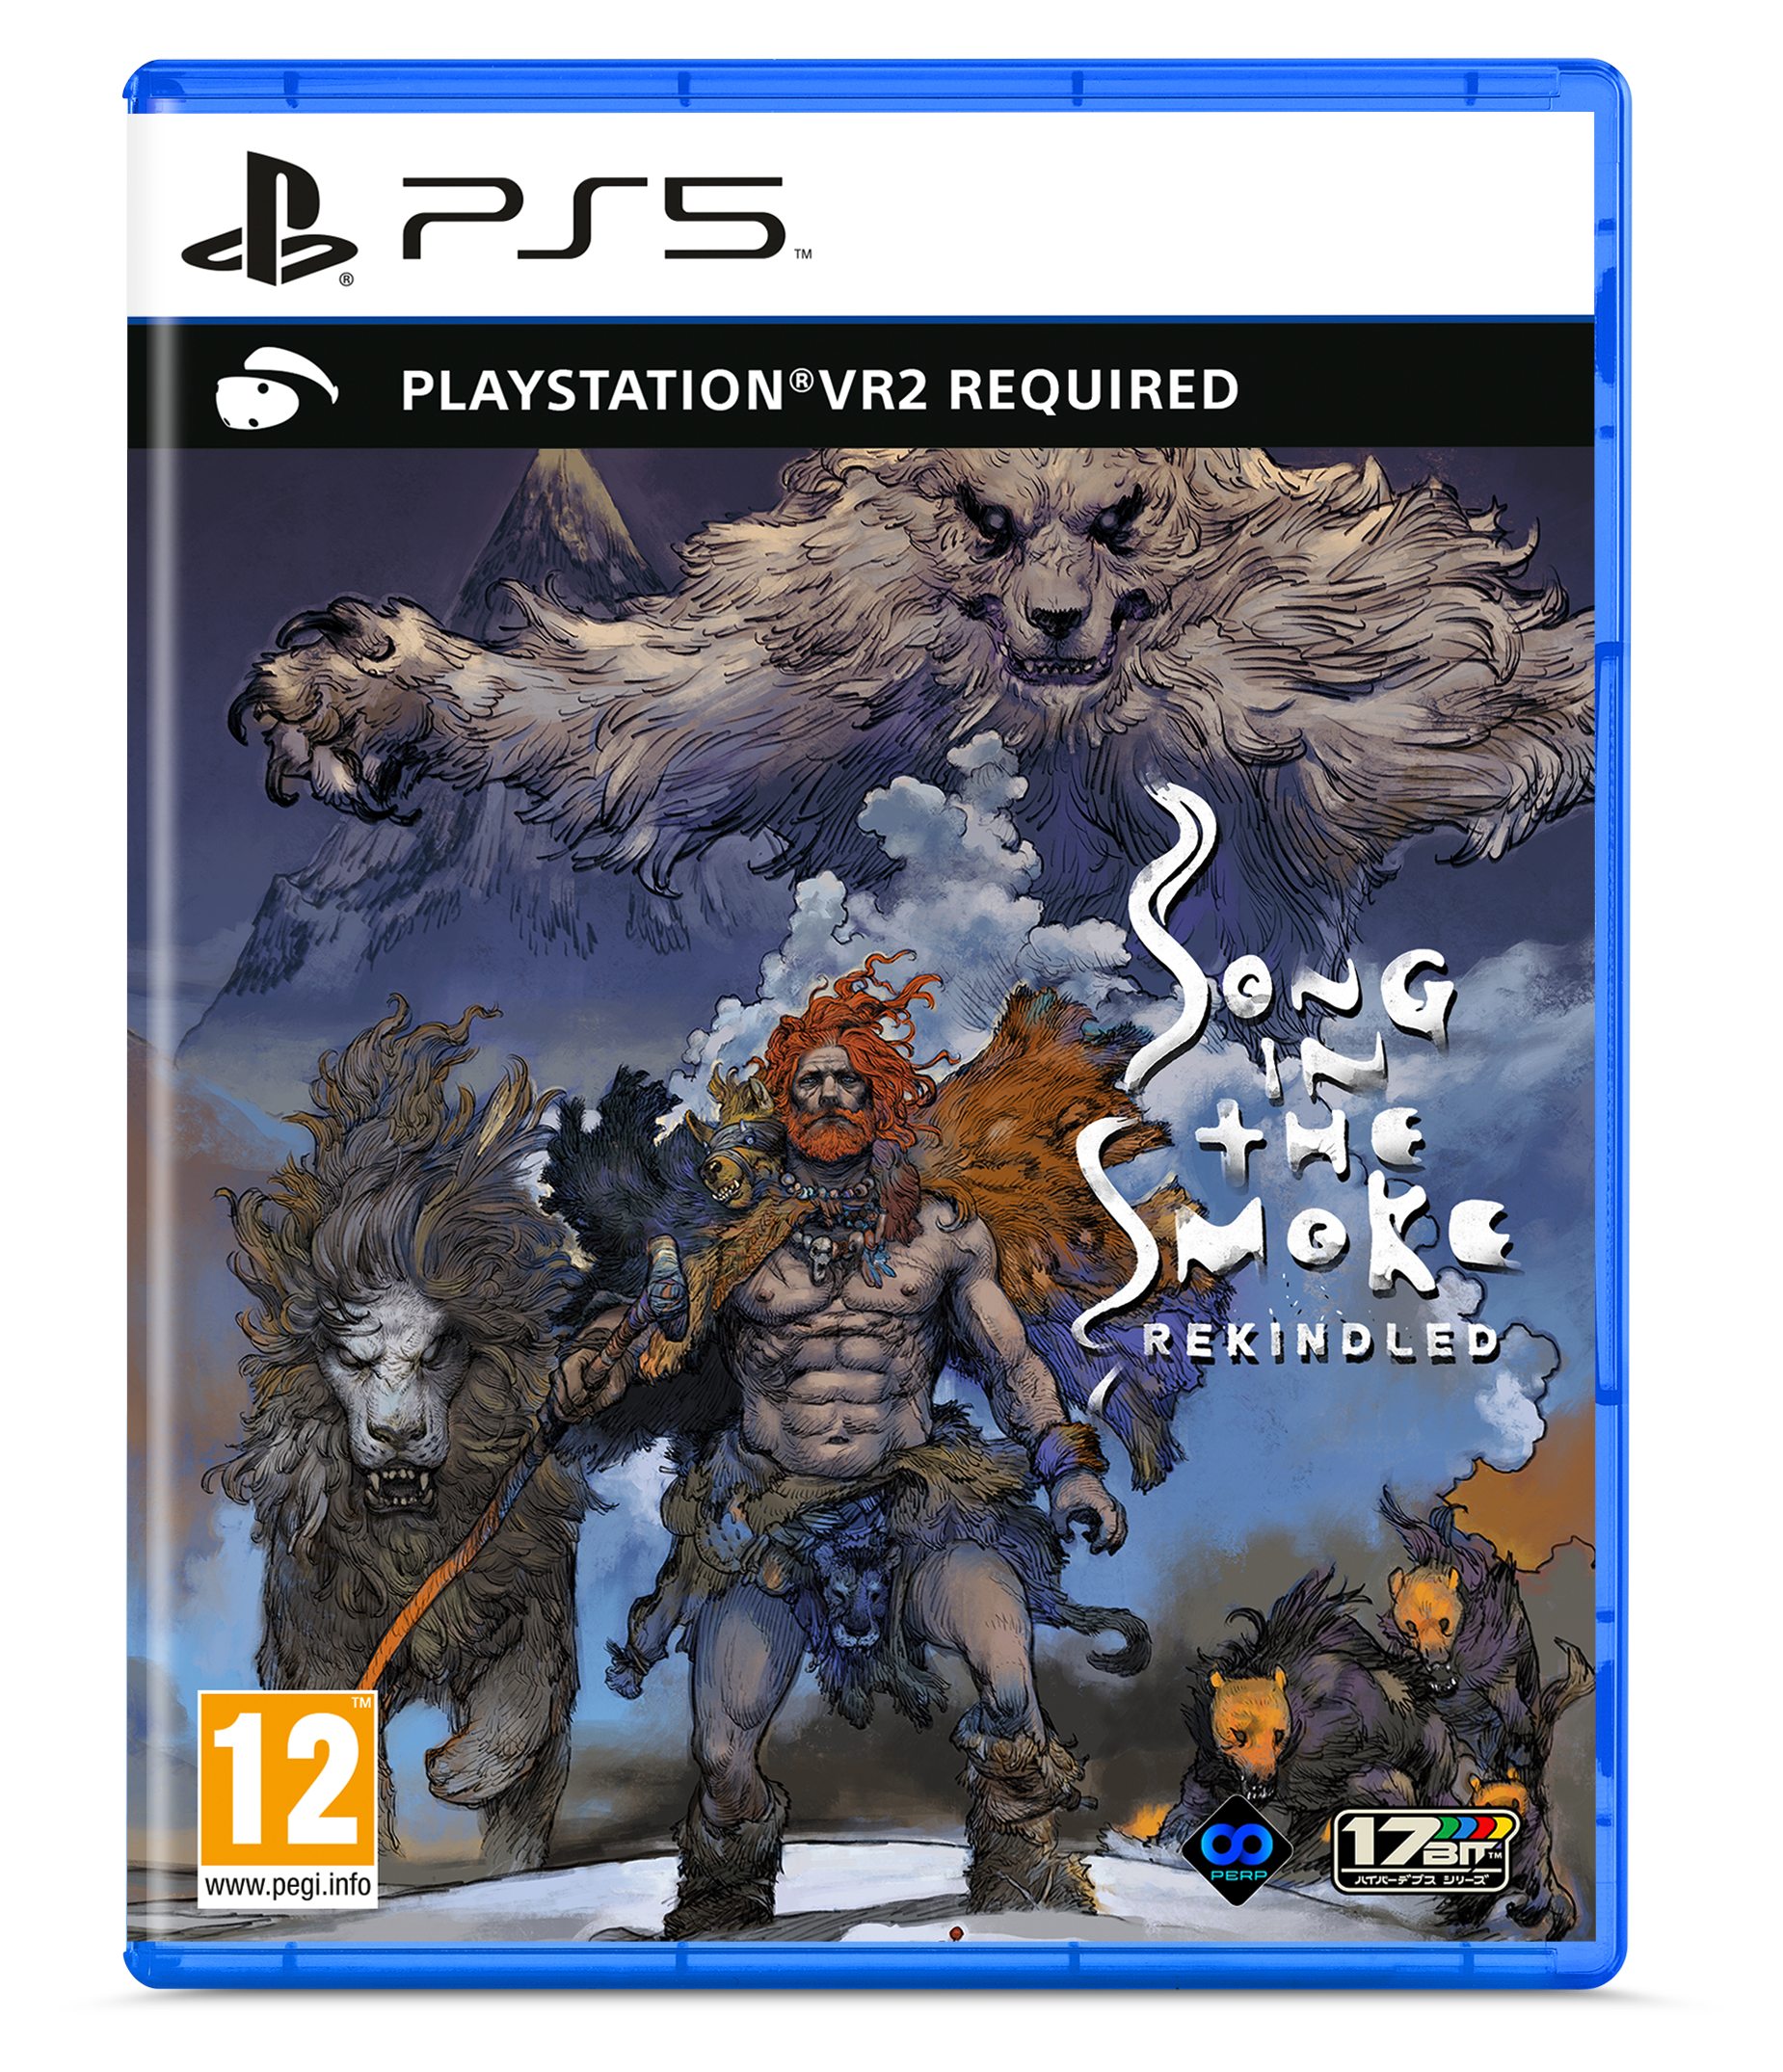 Song in the Smoke: Rekindled (VR) von Perp Games